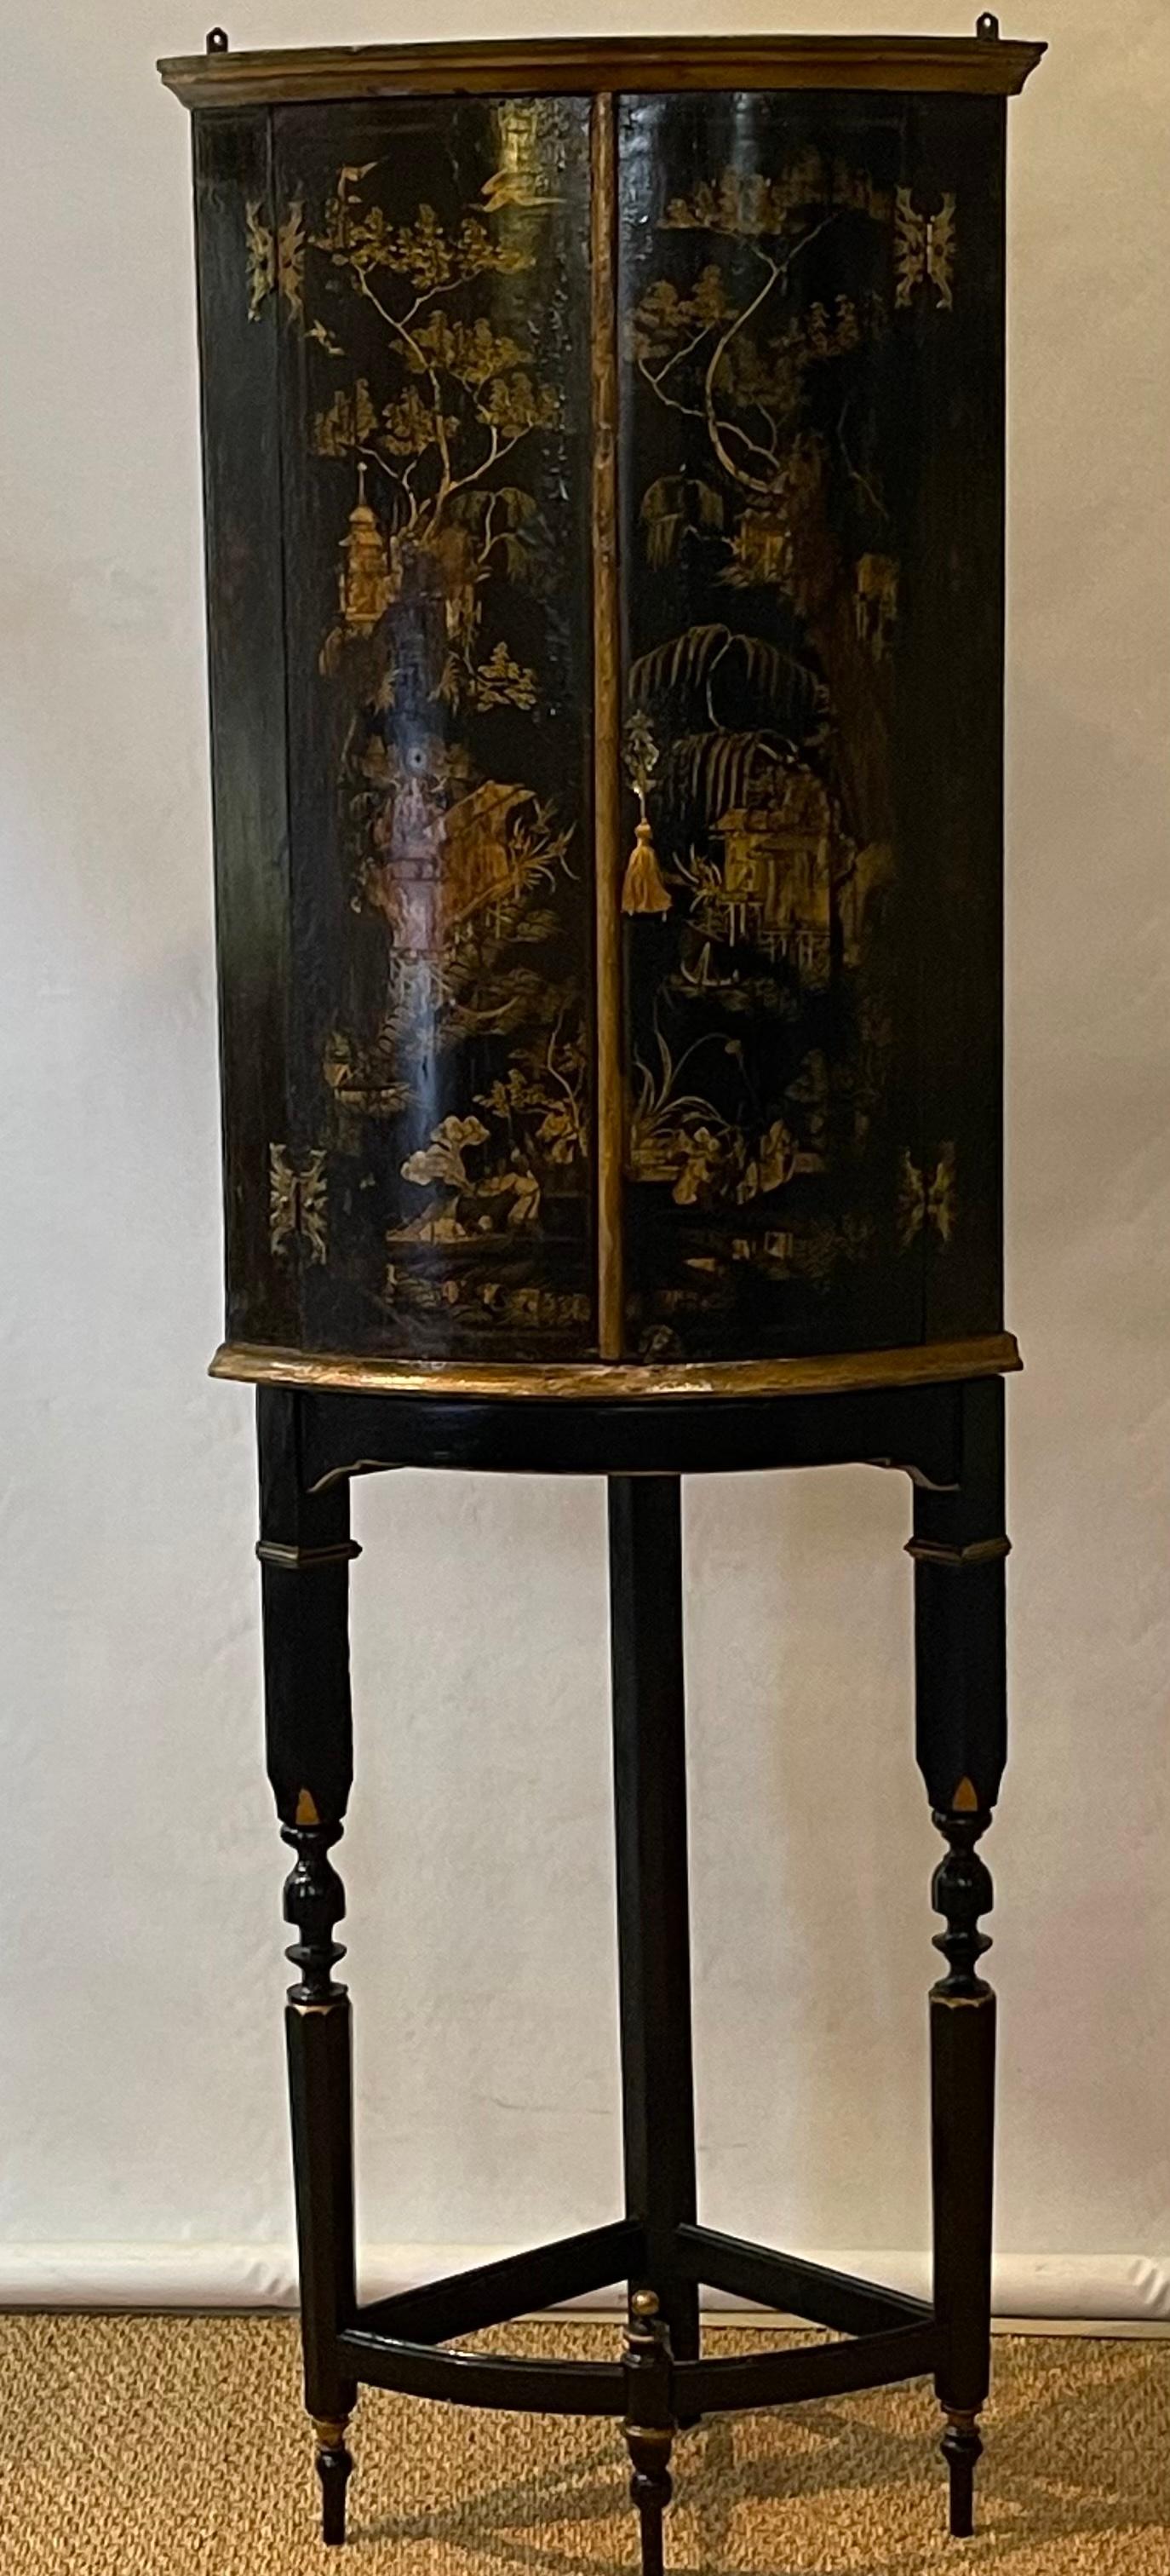 A late 19th C. English Chinoiserie decorated black lacquer corner cabinet on later ebonized and gilt decorated stand.